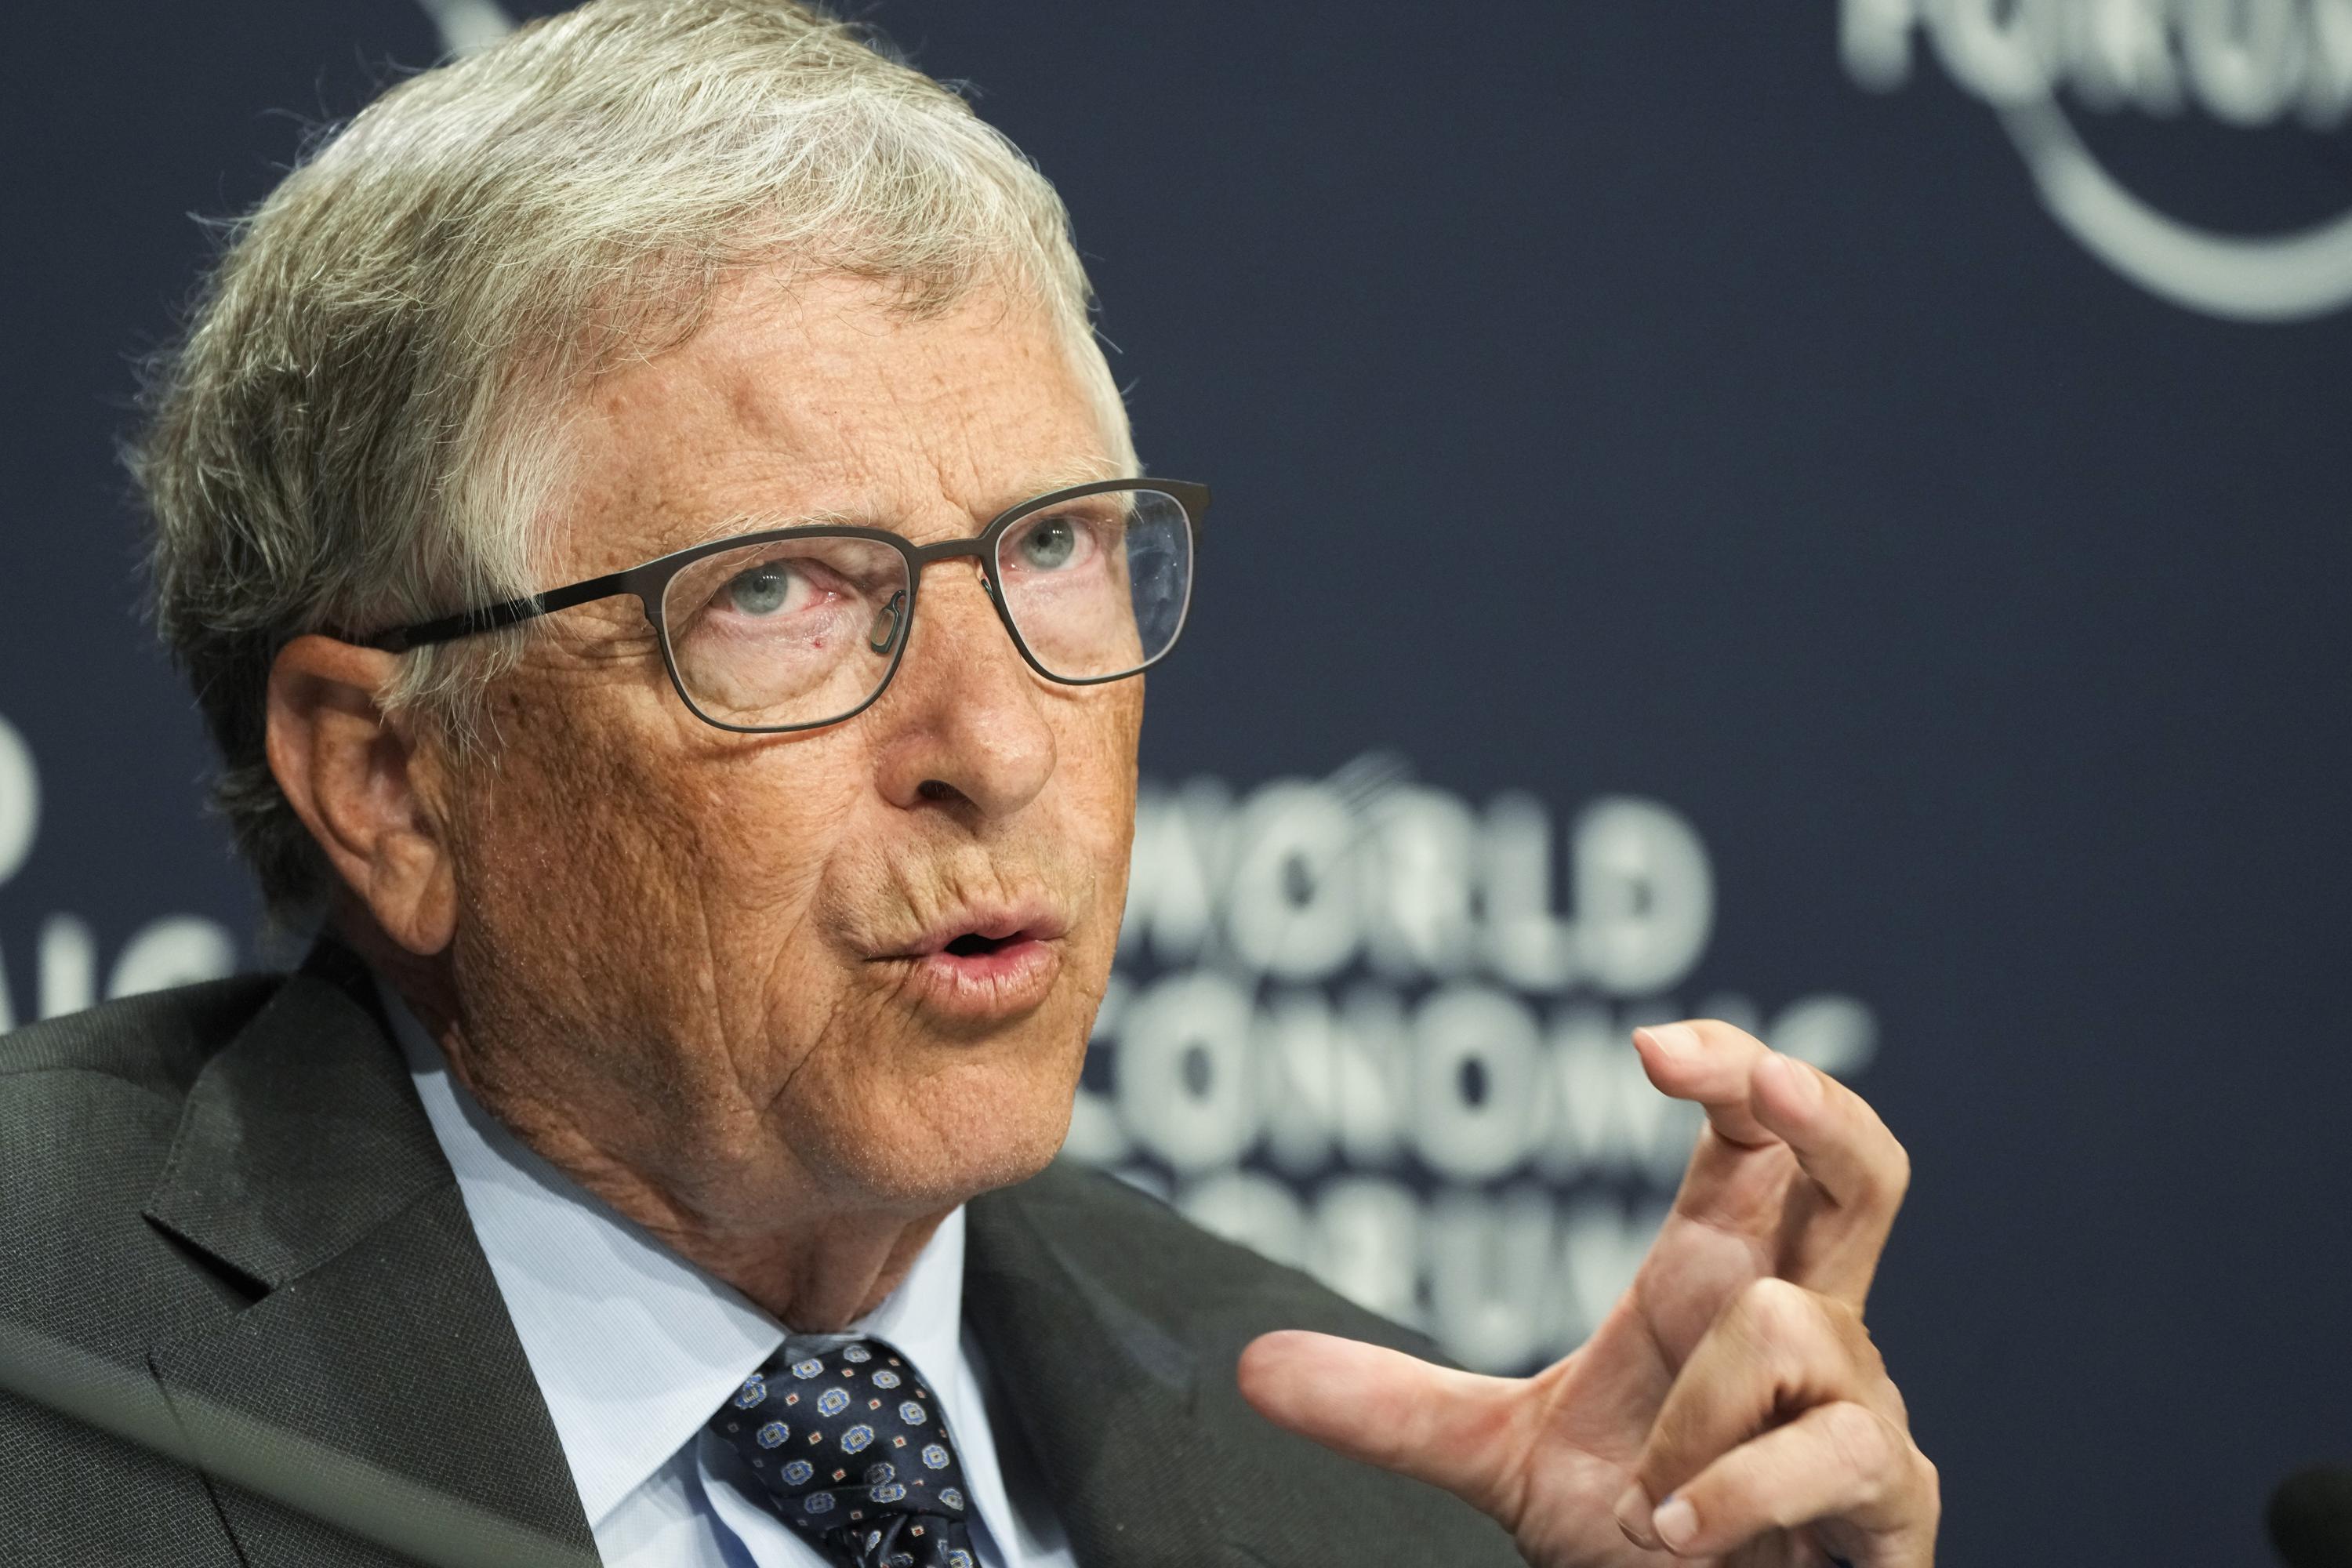 Bill Gates gives $20 billion to stem 'significant suffering'